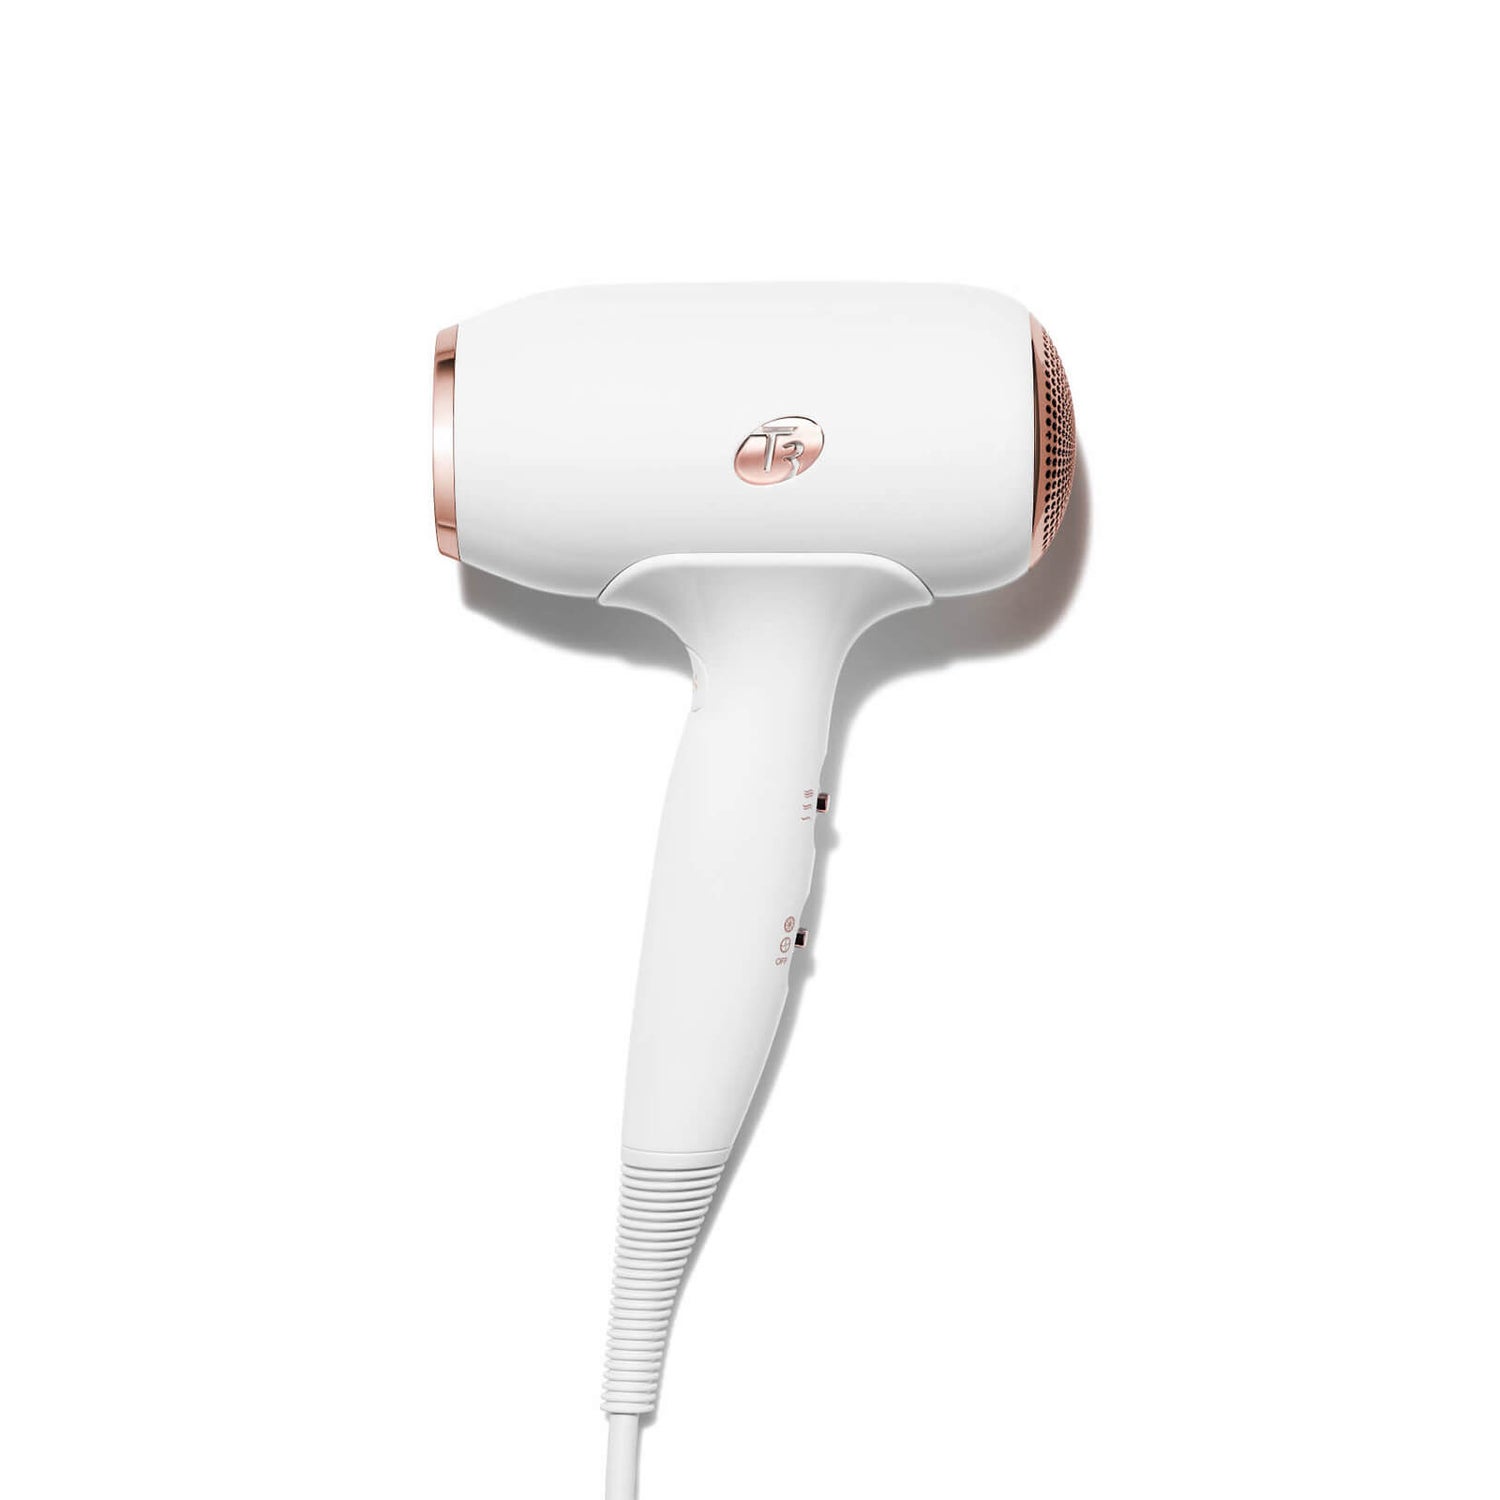 T3 Fit Compact Hair Dryer 1 count - White Rose-Gold